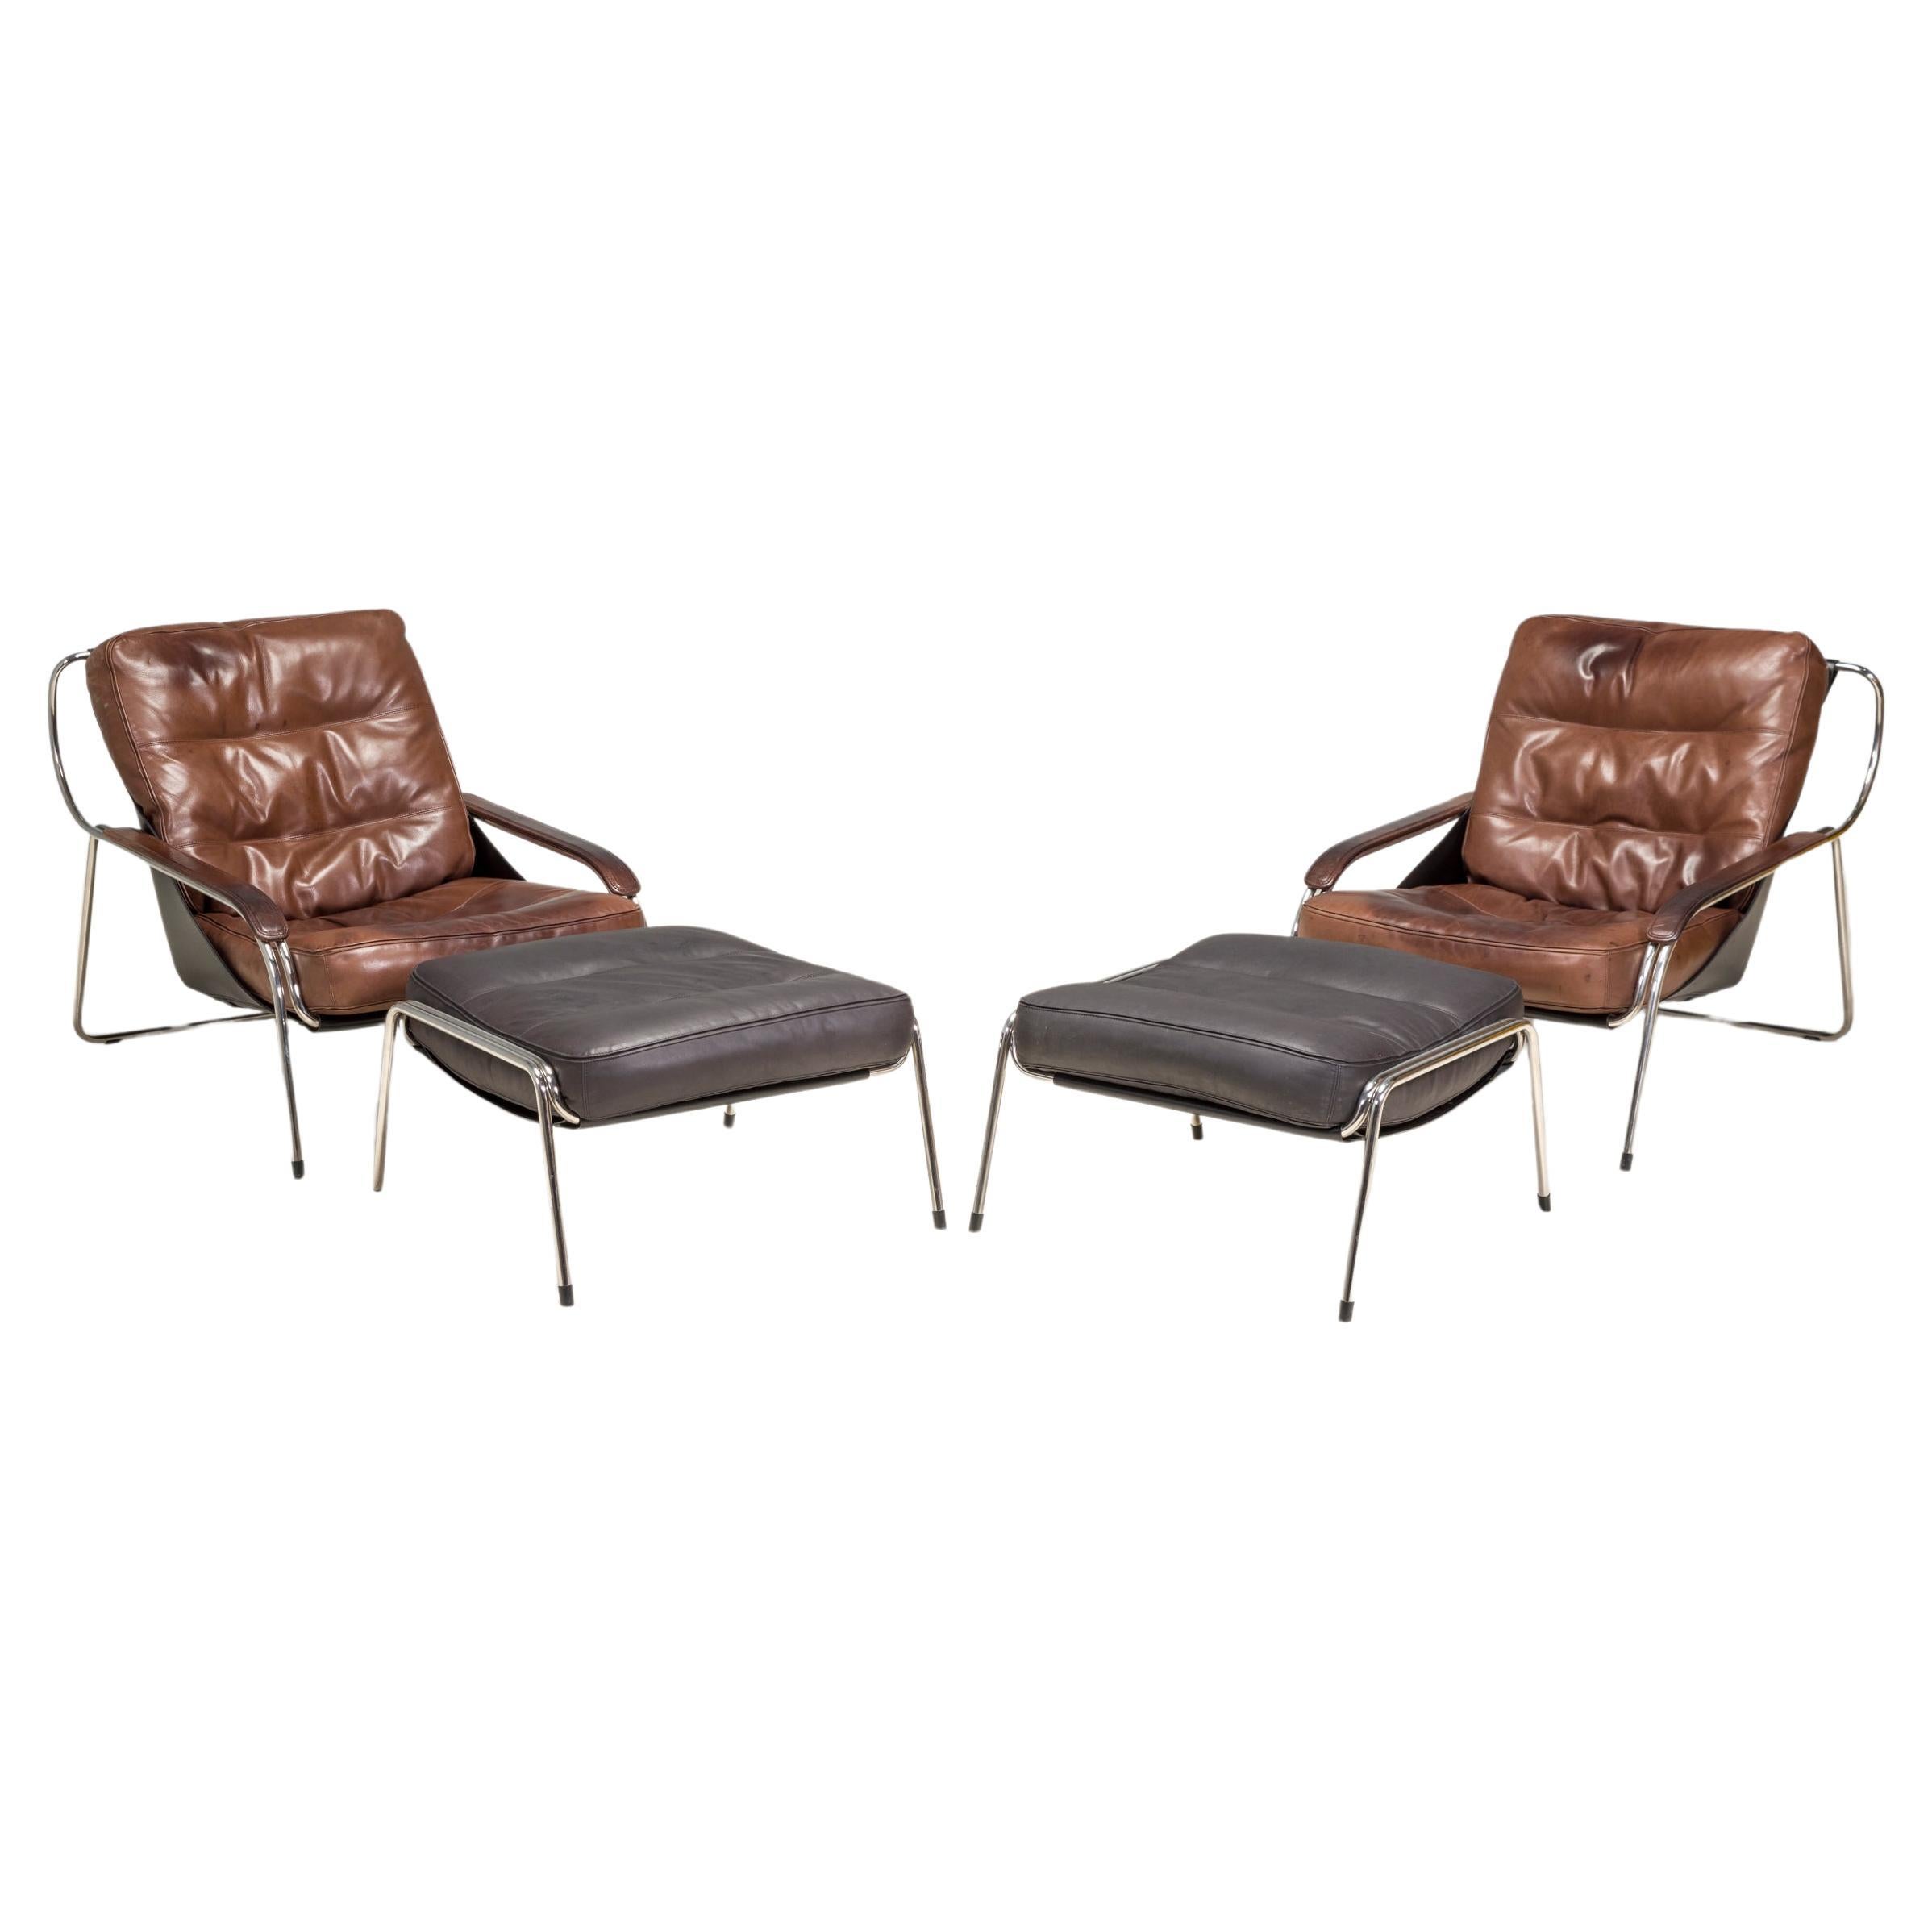 Marco Zanuso for Zanotta Leather Maggiolina Lounge Chair & Footstool, Set of 2 For Sale